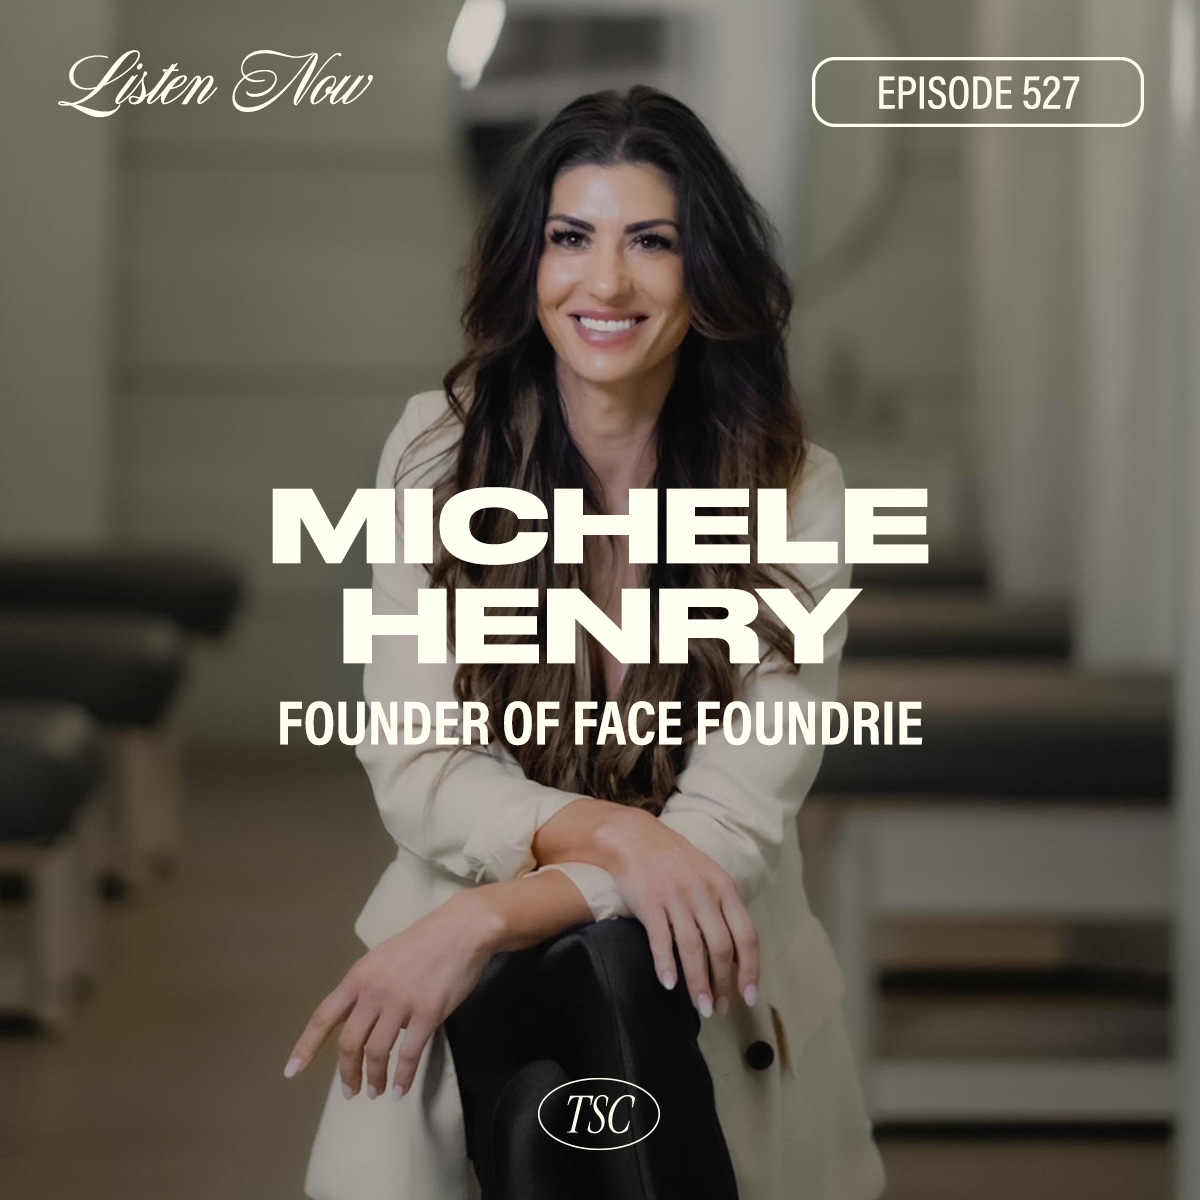 Michele Henry of Face Foundrie